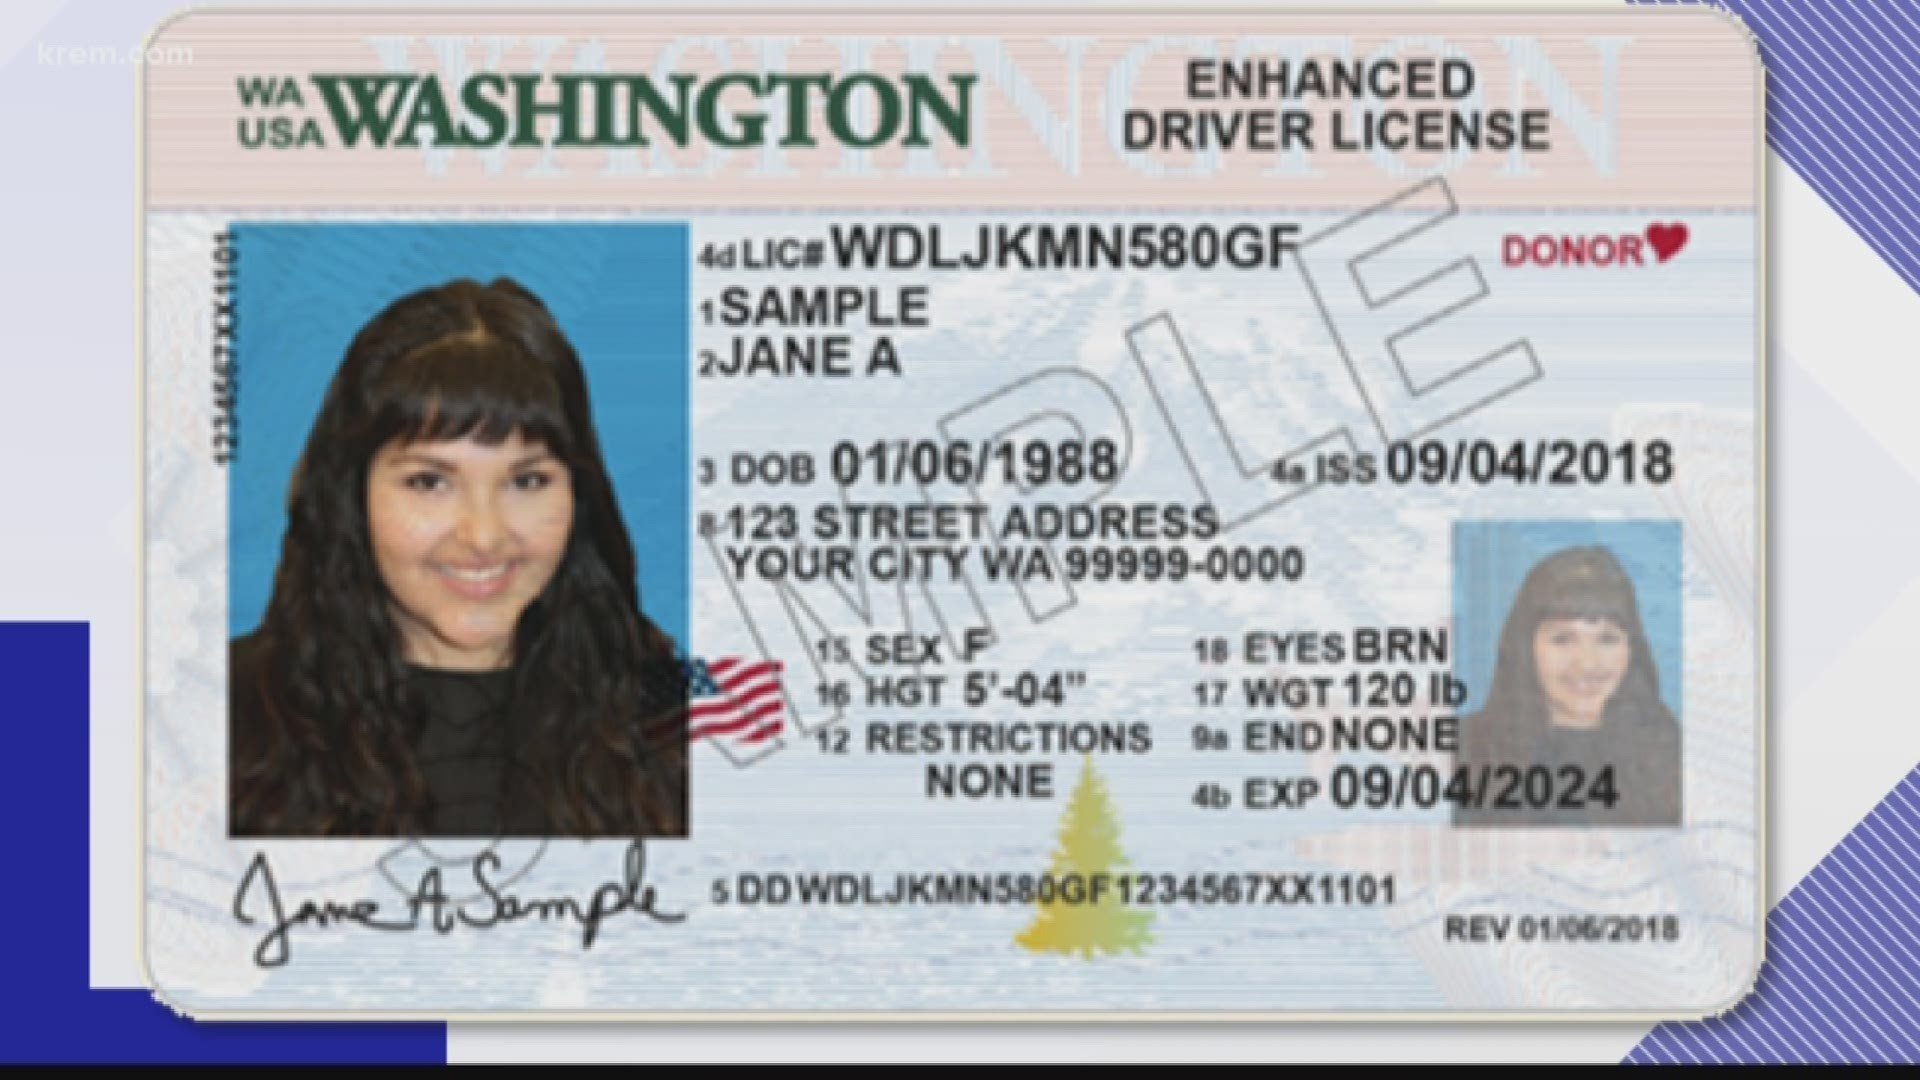 Washington is fully compliant with REAL ID. Here's what you should know